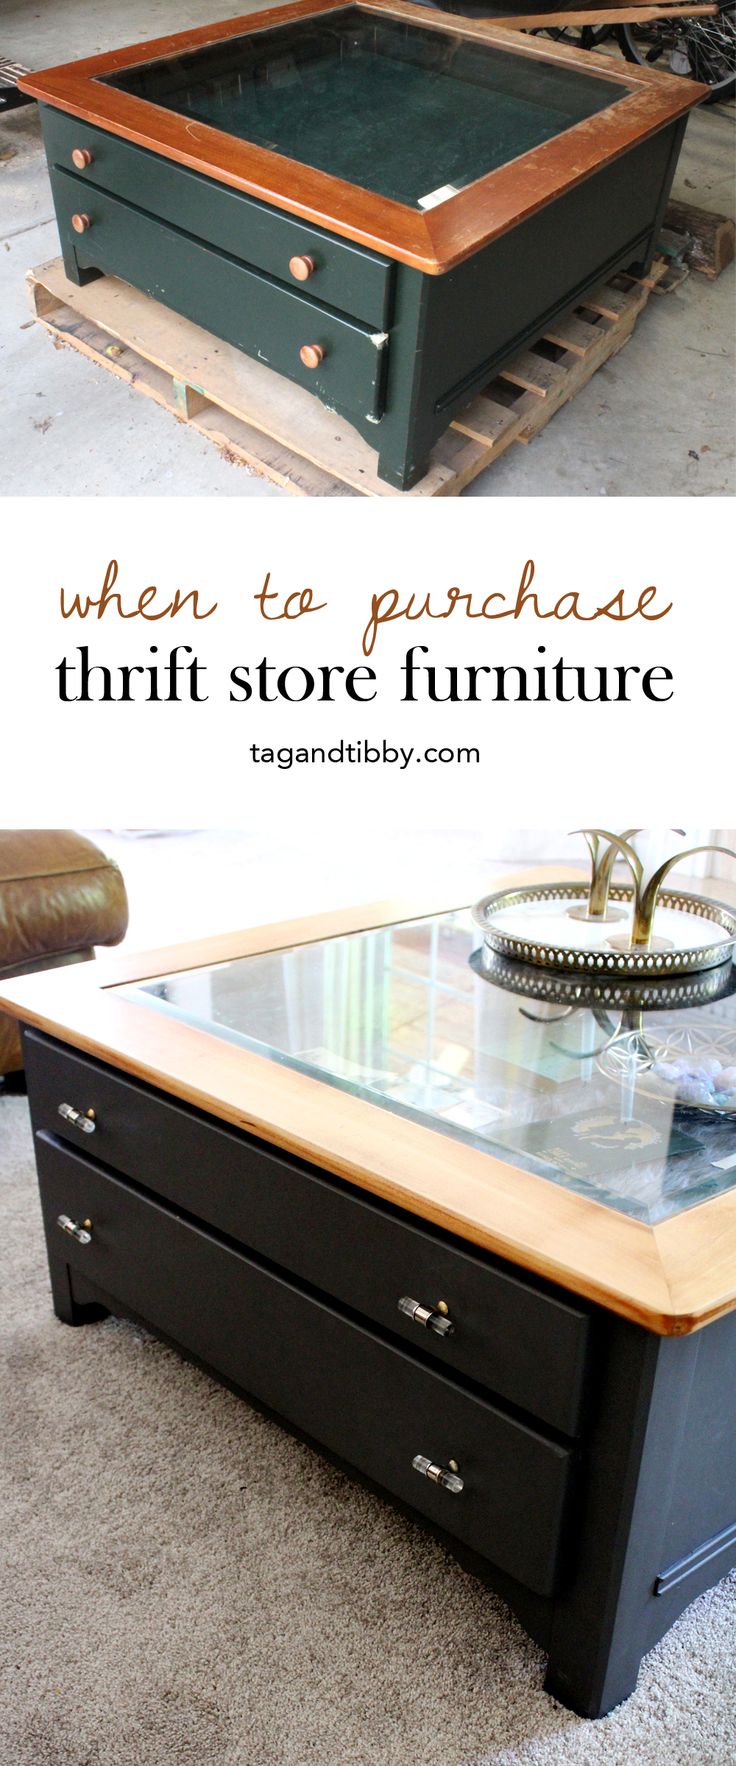 4 Questions You Should Always Ask Before Purchasing Used Furniture